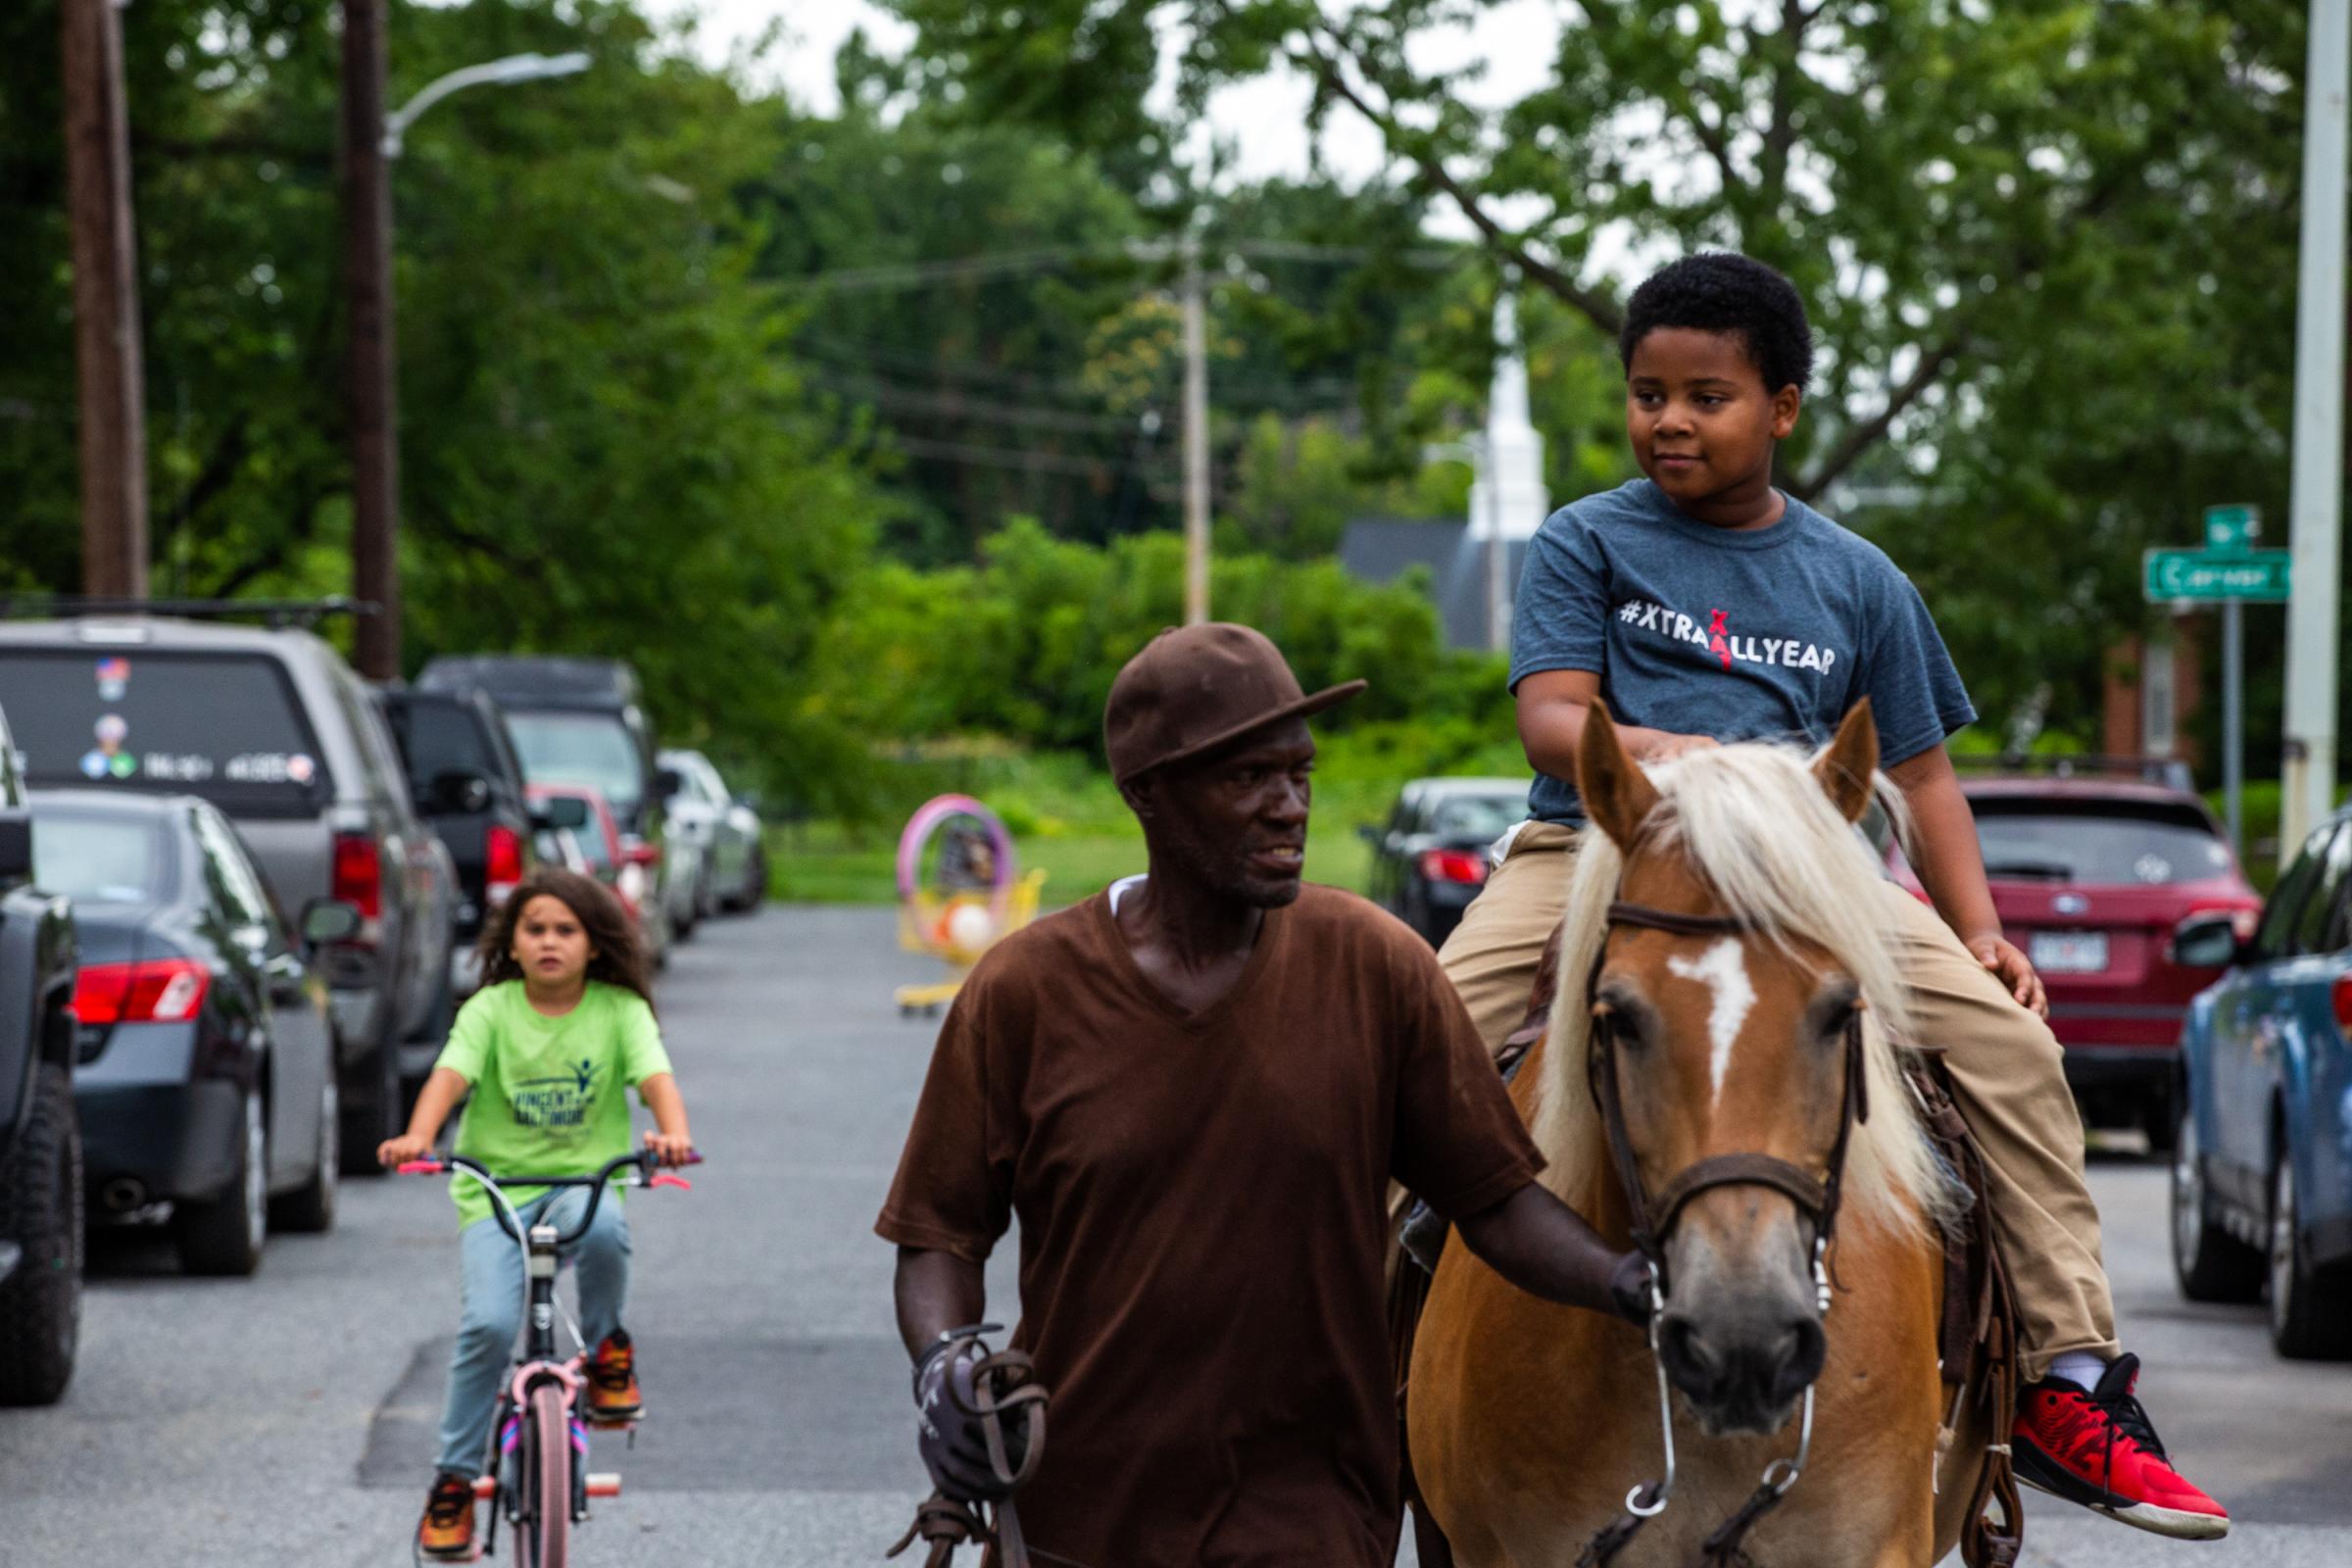 Jeremiah Dixon, 10, rides a horse down Main Street on August 7, 2021 in Turner Station, Md. The horse was there as part of the community&#39;s annual homecoming day event which saw residents past and present gather at the old Veterans of Foreign Wars building to swap stories about Turner Station of old and talk about their hopes for the community&rsquo;s future.